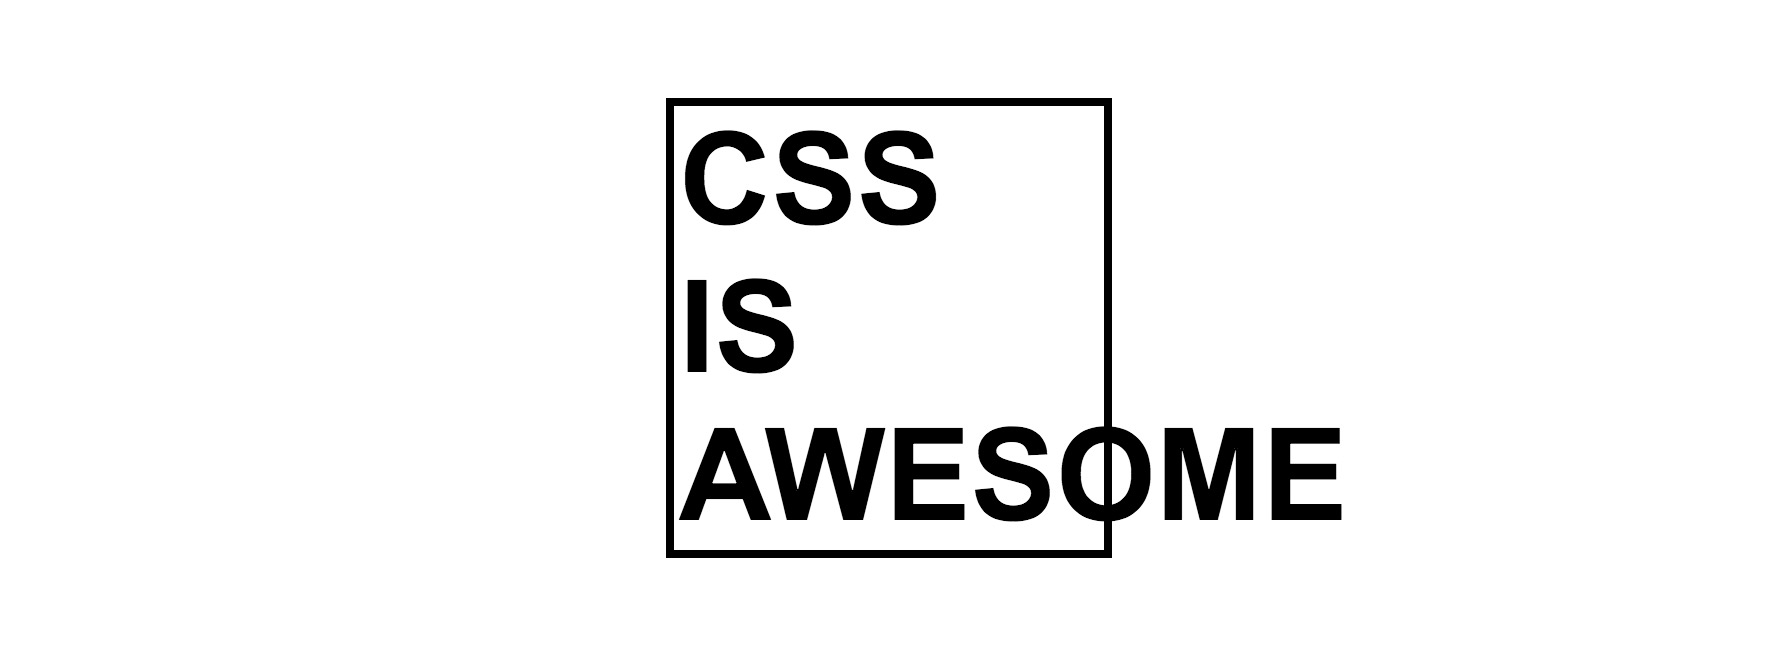 CSS is Awesome (overflow meme)